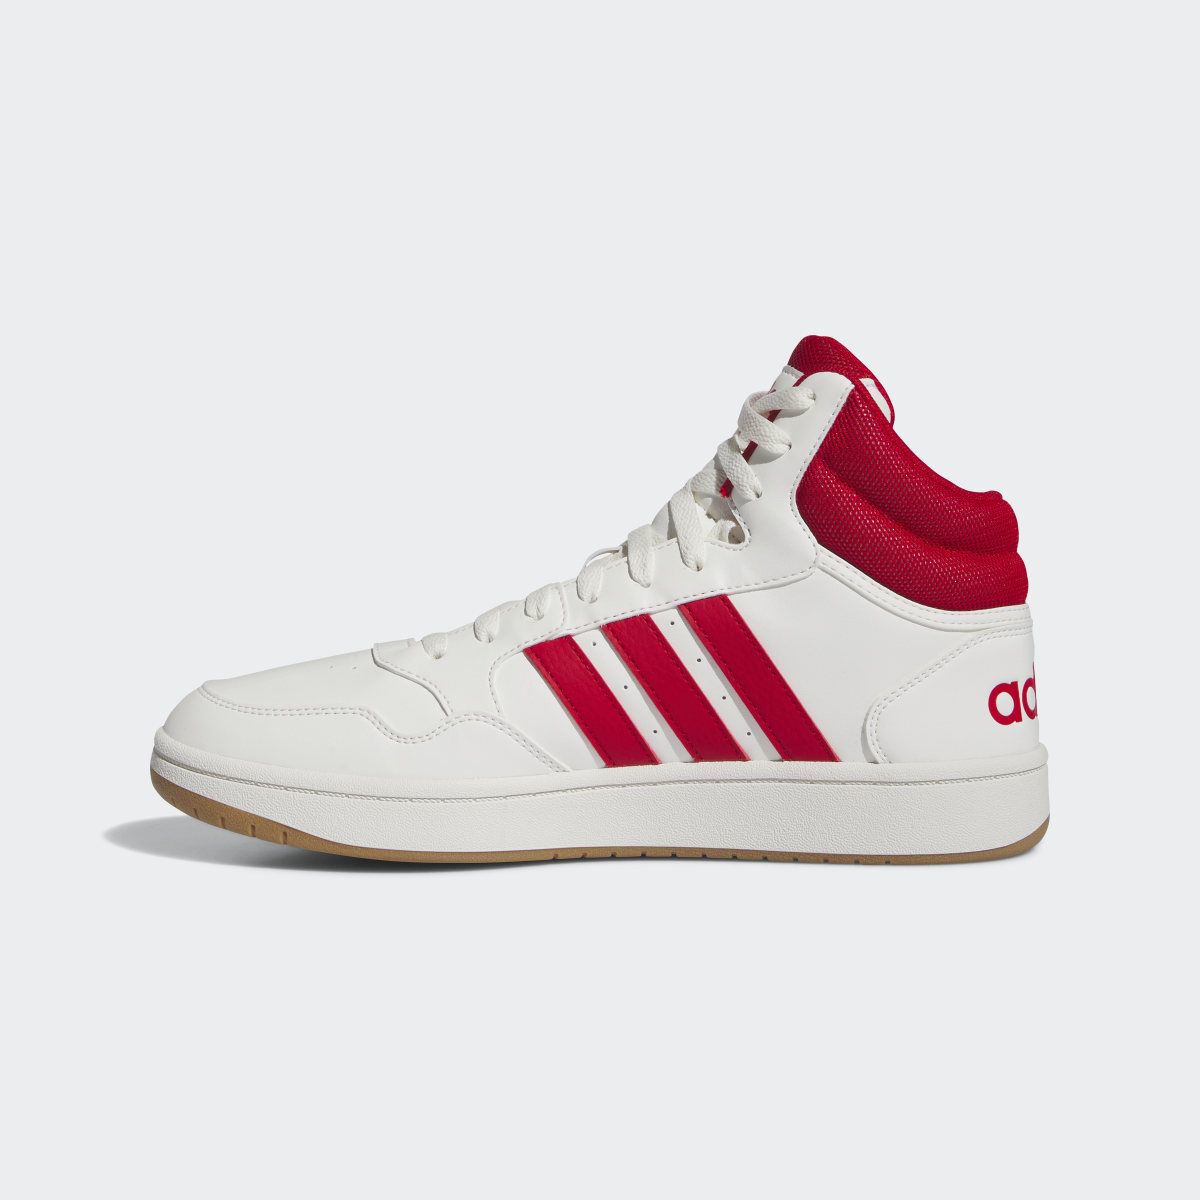 Adidas Hoops 3.0 Mid Lifestyle Basketball Classic Vintage Schuh. 7